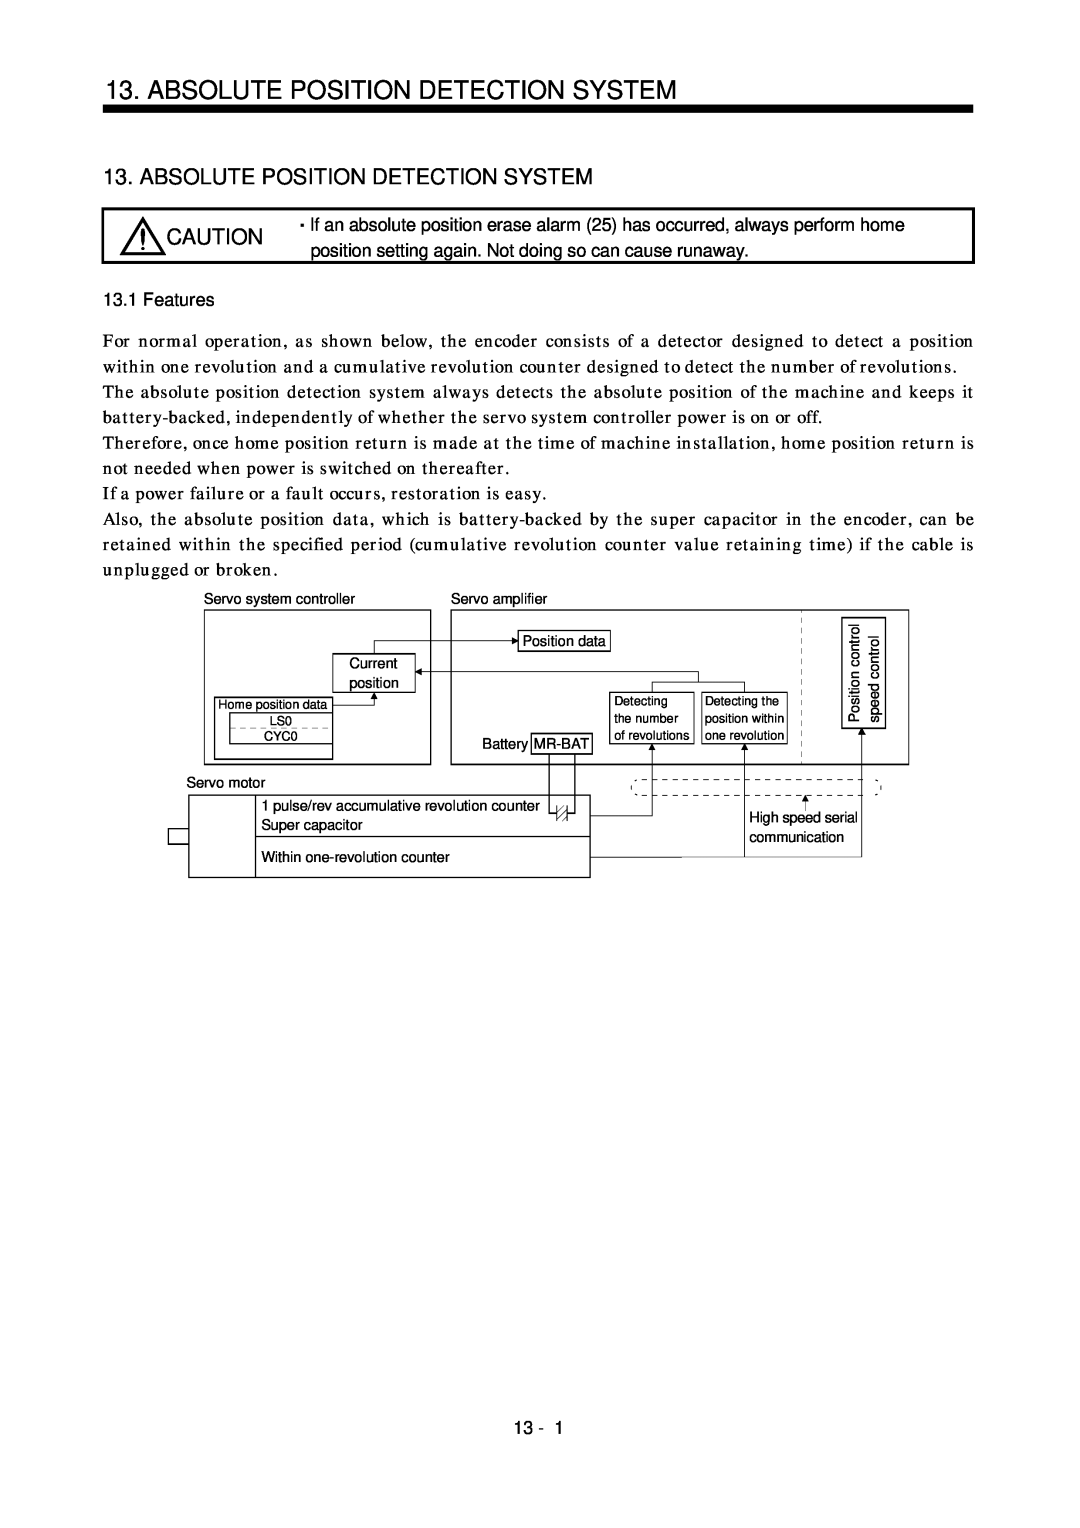 Bose MR-J2S- B instruction manual Absolute Position Detection System 